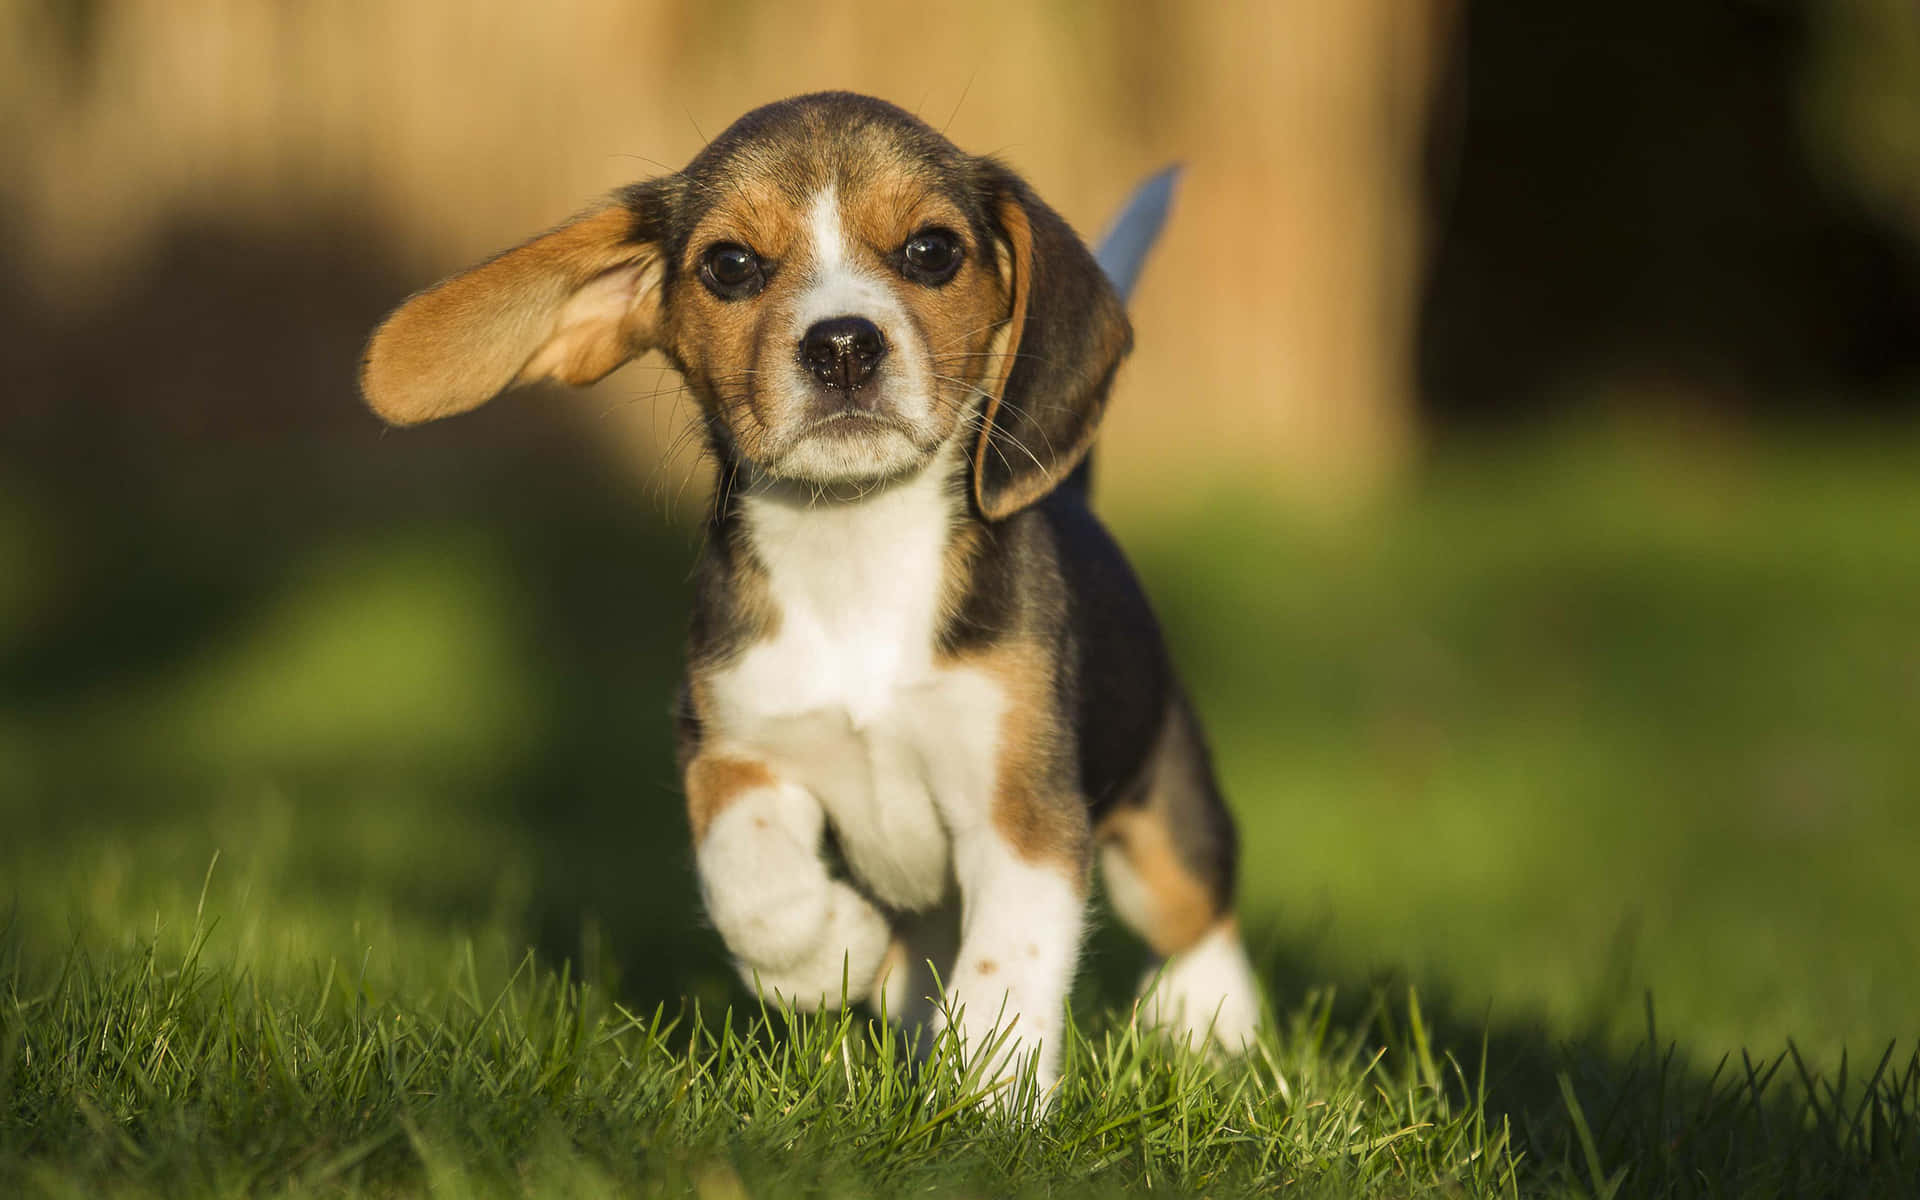 Cute beagle pup looking up with curiosity